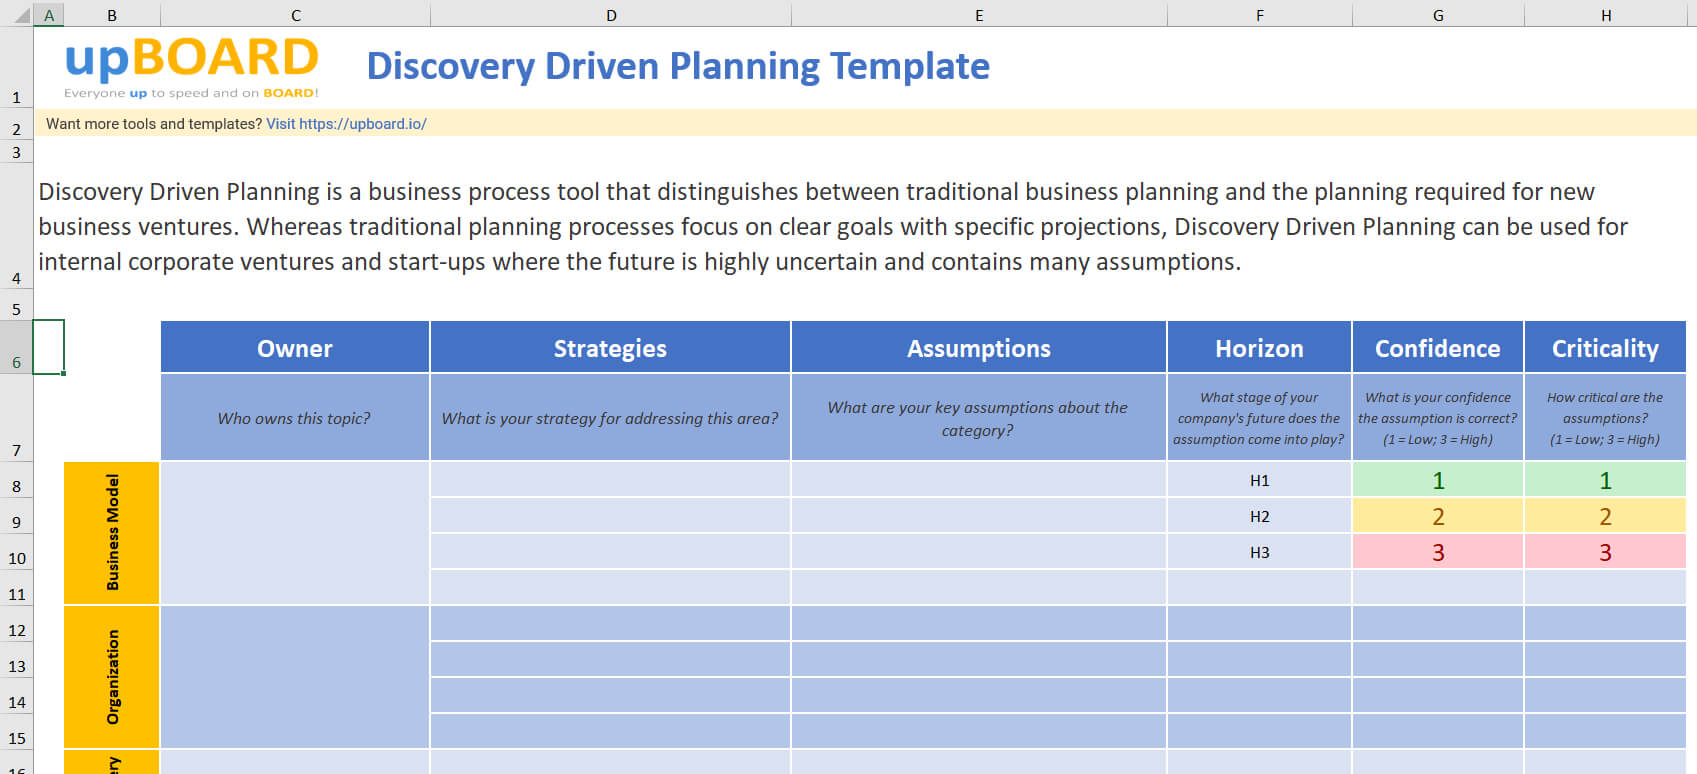 Discovery Driven Planning: Digital Online Tools & Templates Throughout Business Process Discovery Template